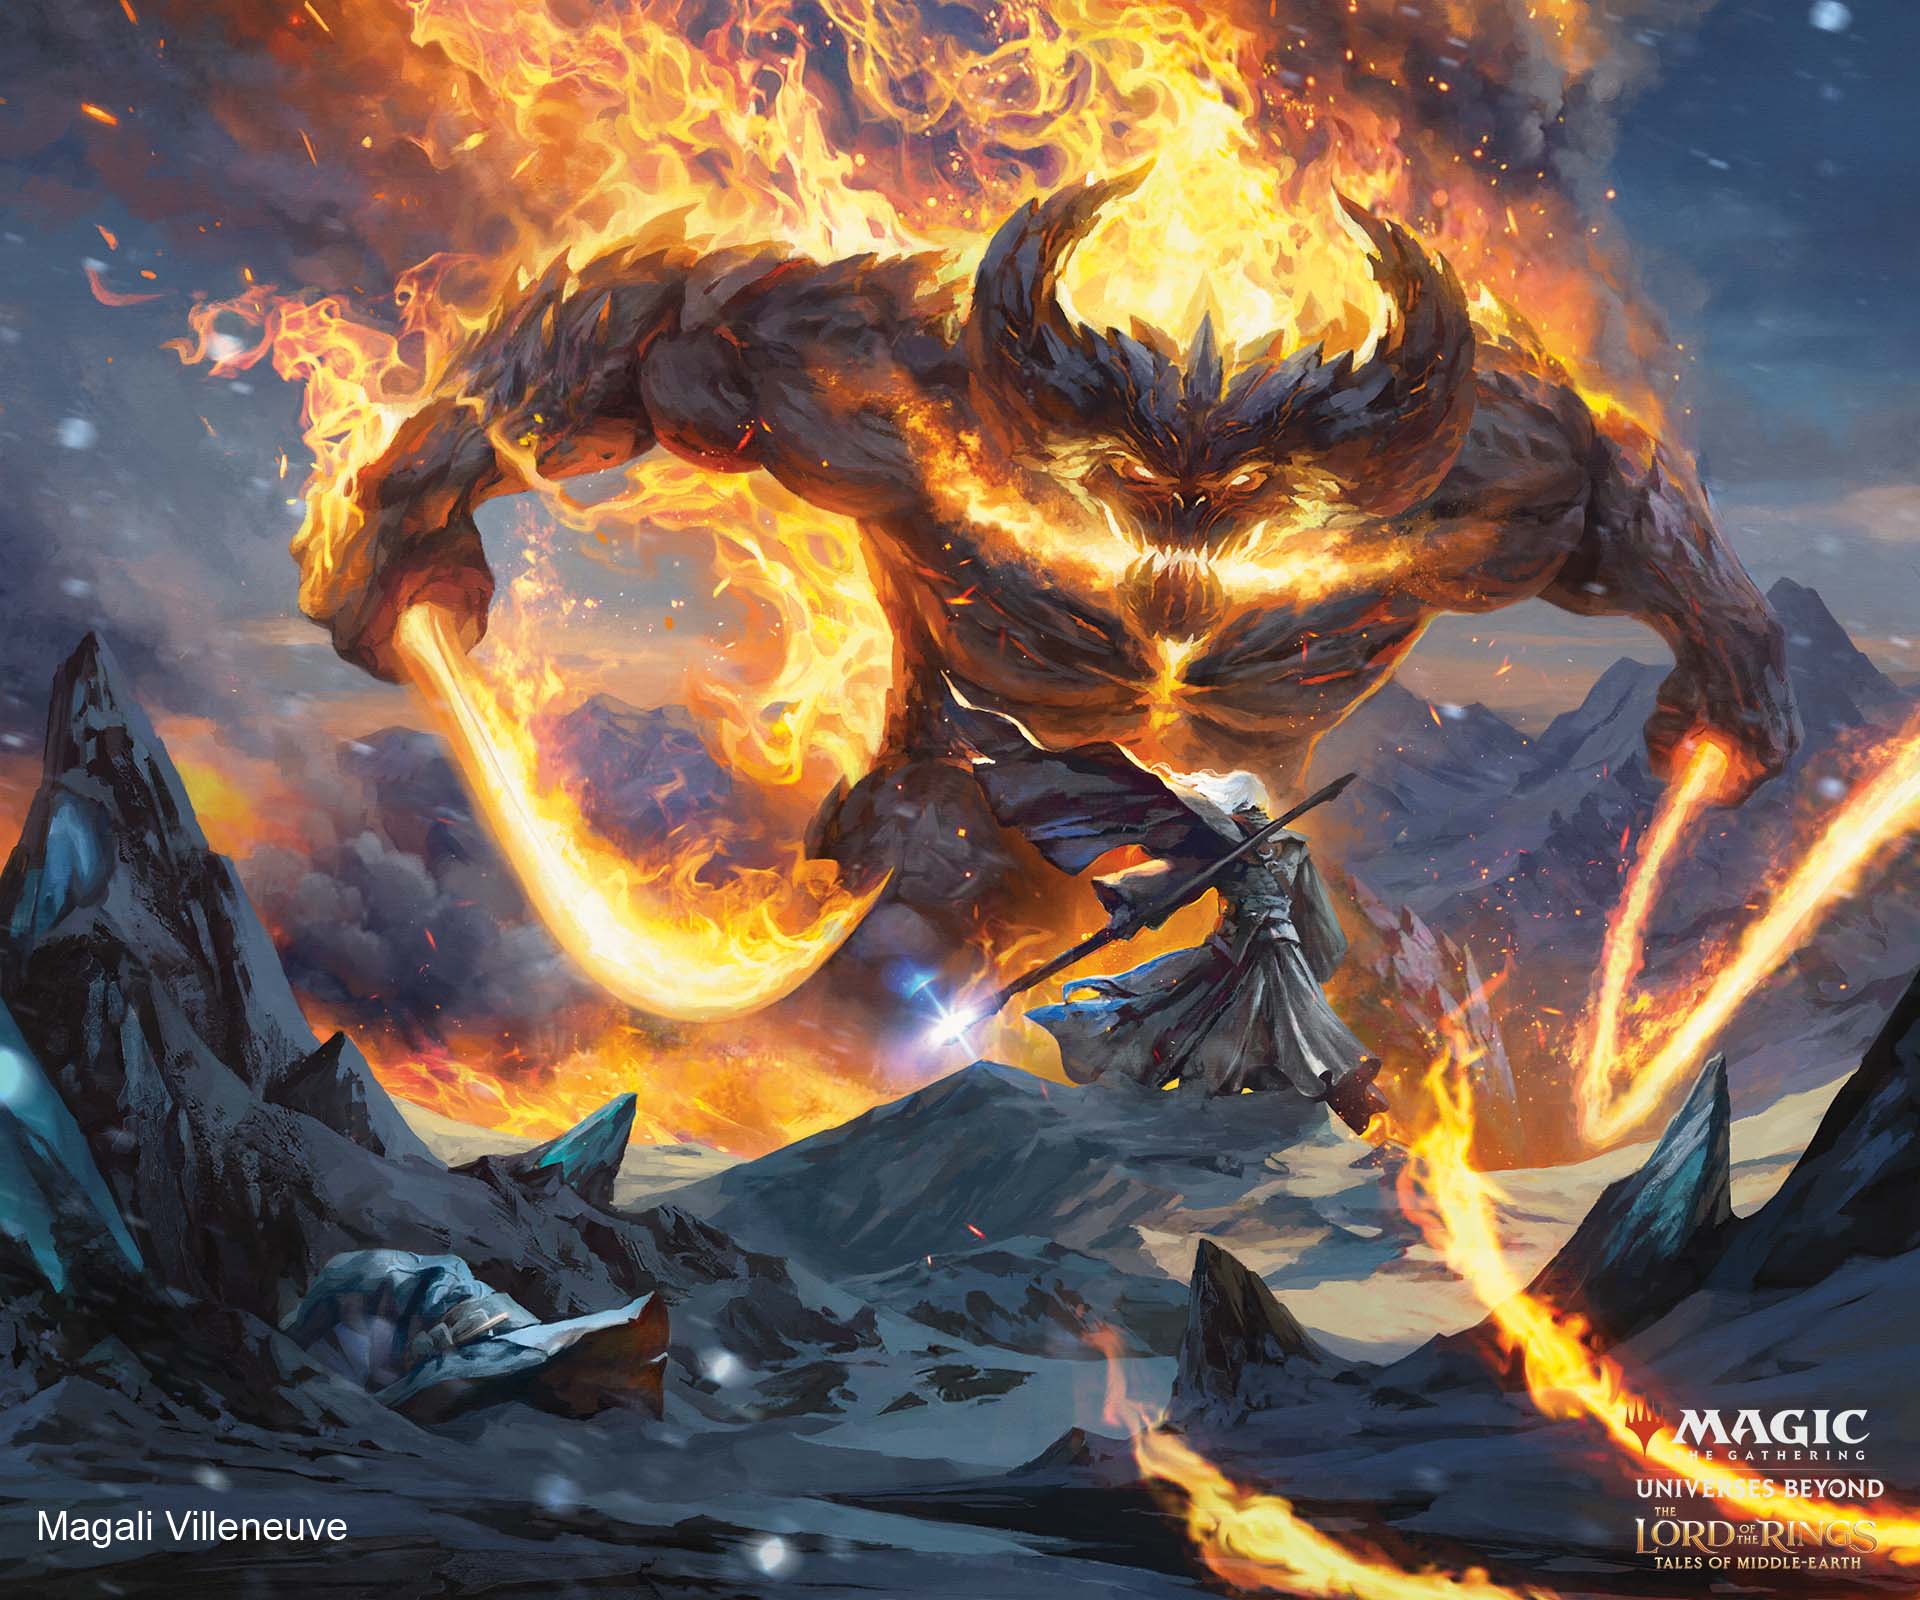 A card art image from Magic: The Gathering's Lord of the Rings: Tales of Middle-earth card set.